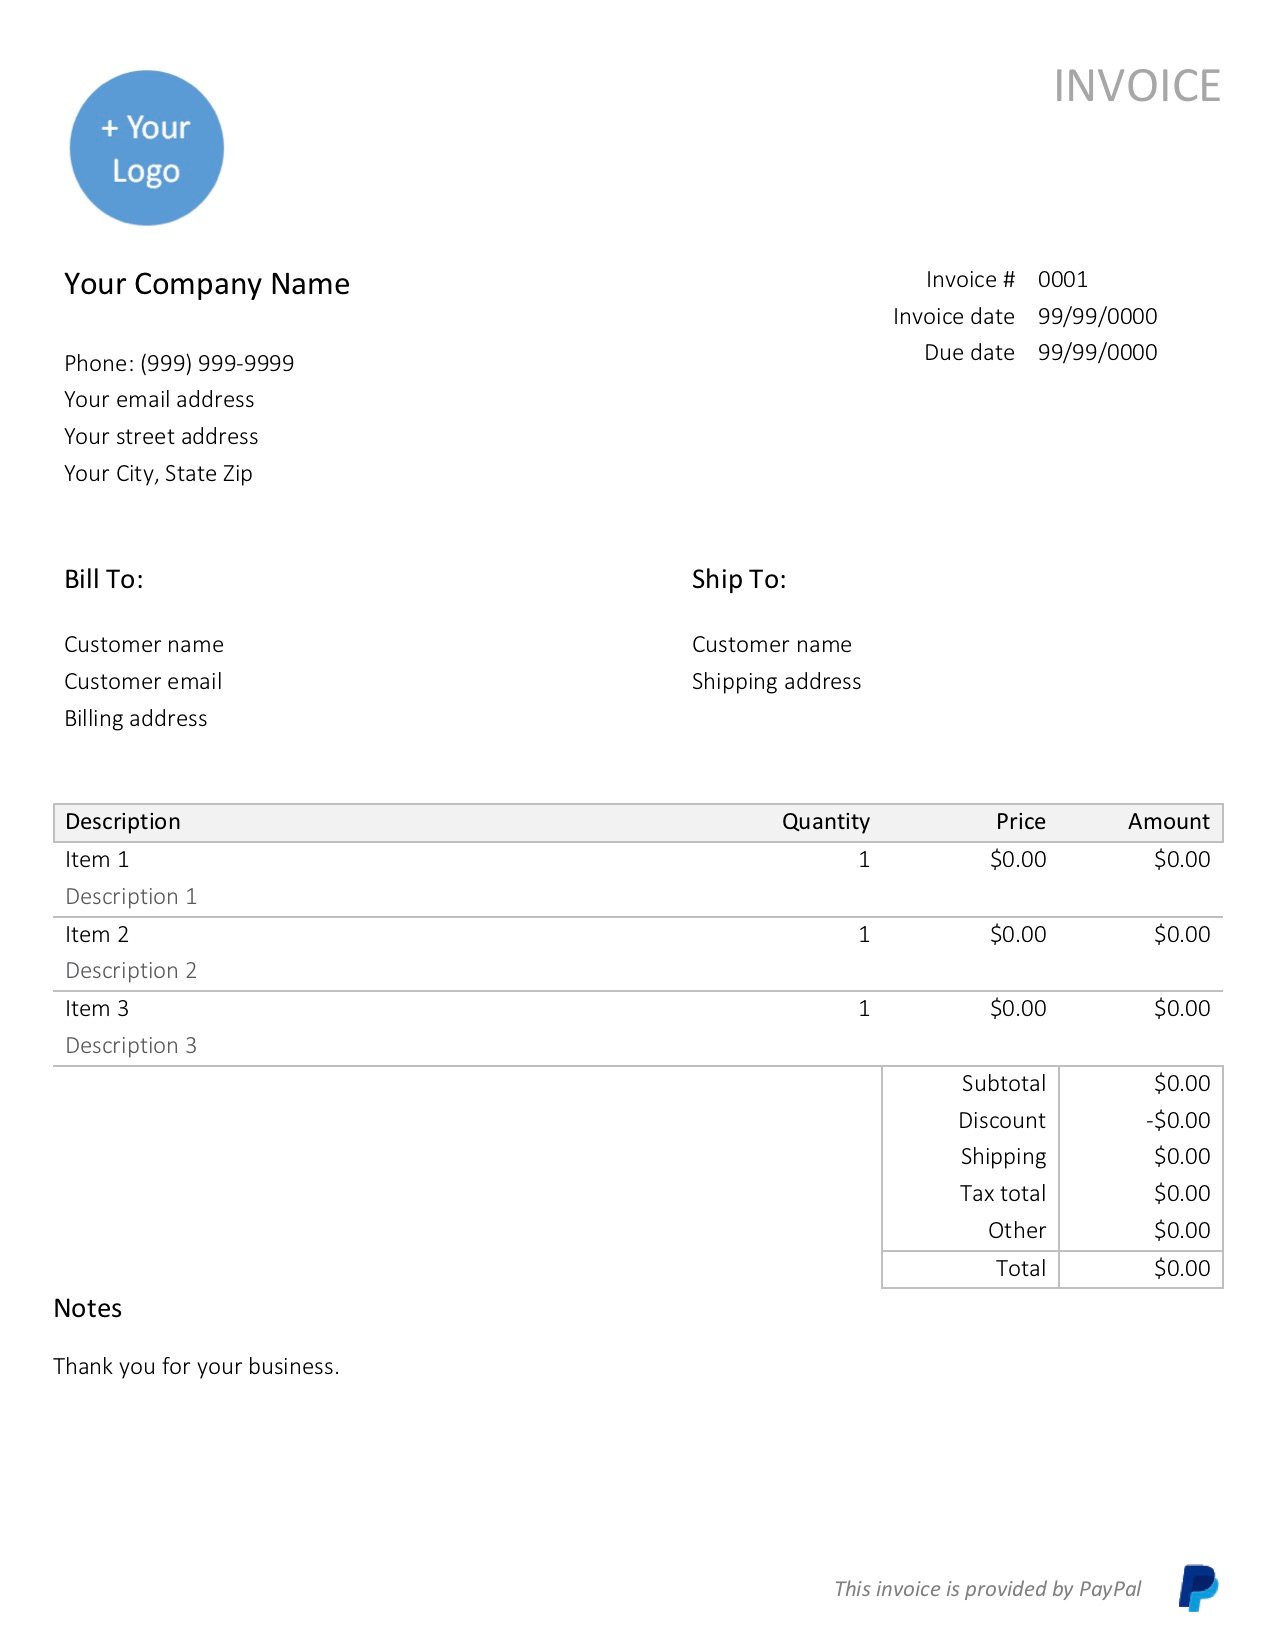 Sample_Invoice_Template_by_PayPal